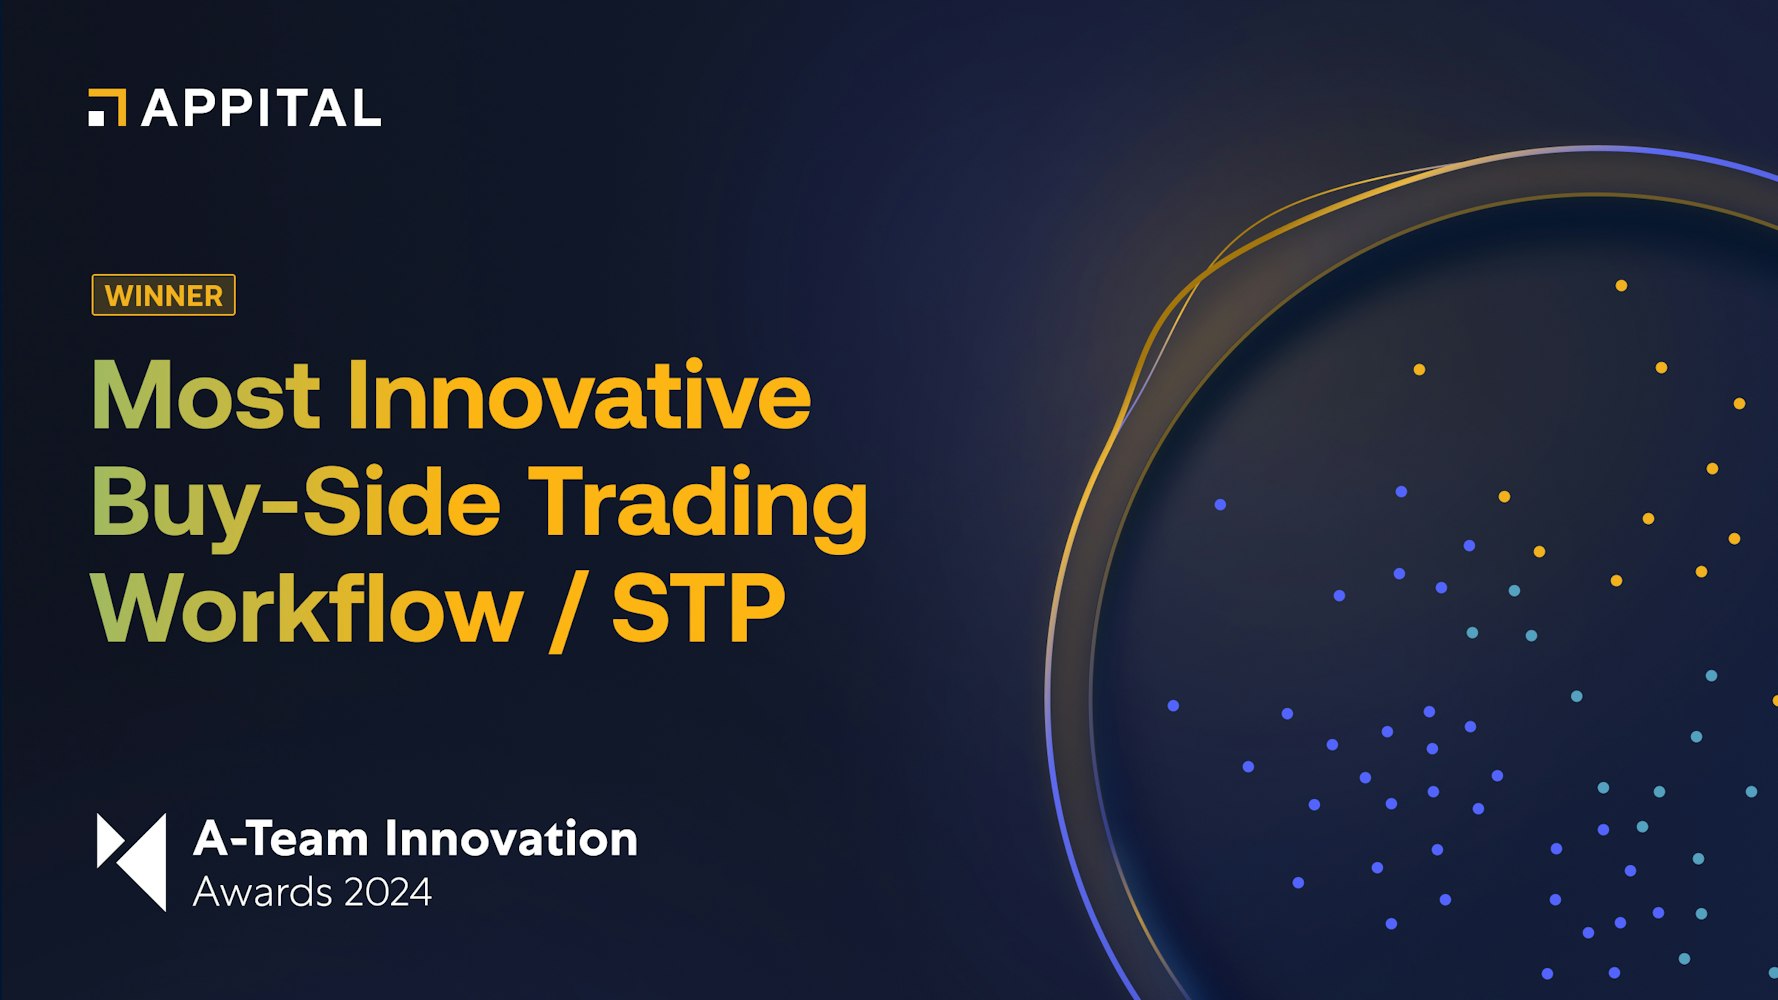 Appital wins “Most Innovative Buy-Side Trading Workflow” at the A-Team Innovation Awards 2024